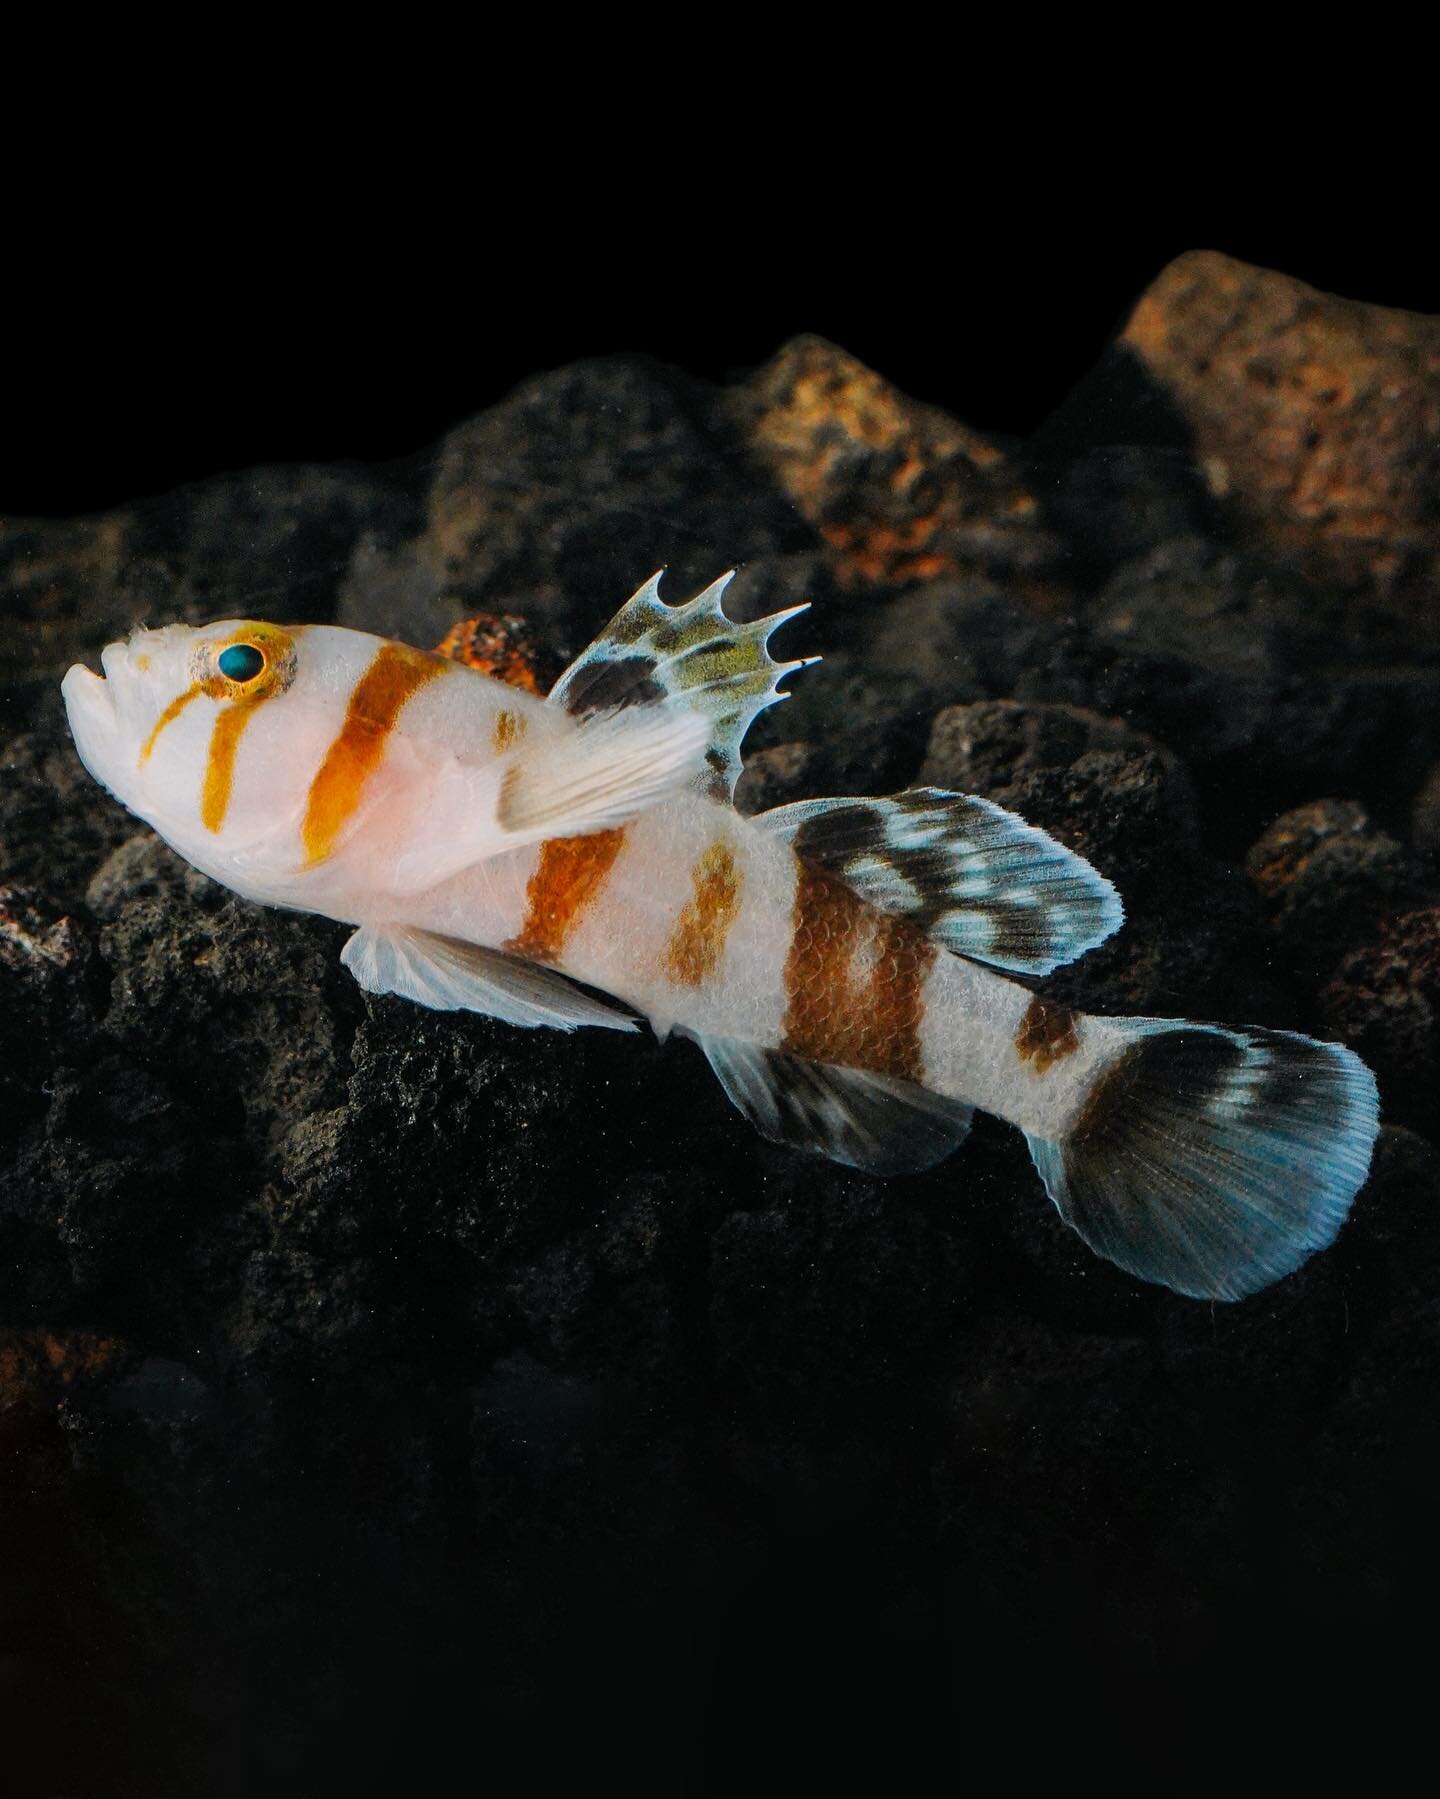 Koumansetta Rainfordi, the old glory or Court Jester goby, is a species of goby native to tropical reefs of the western Pacific Ocean where it occurs at depths of from 2 to 30 metres (6.6 to 98.4 ft). This species can reach a length of 8.5 centimetre